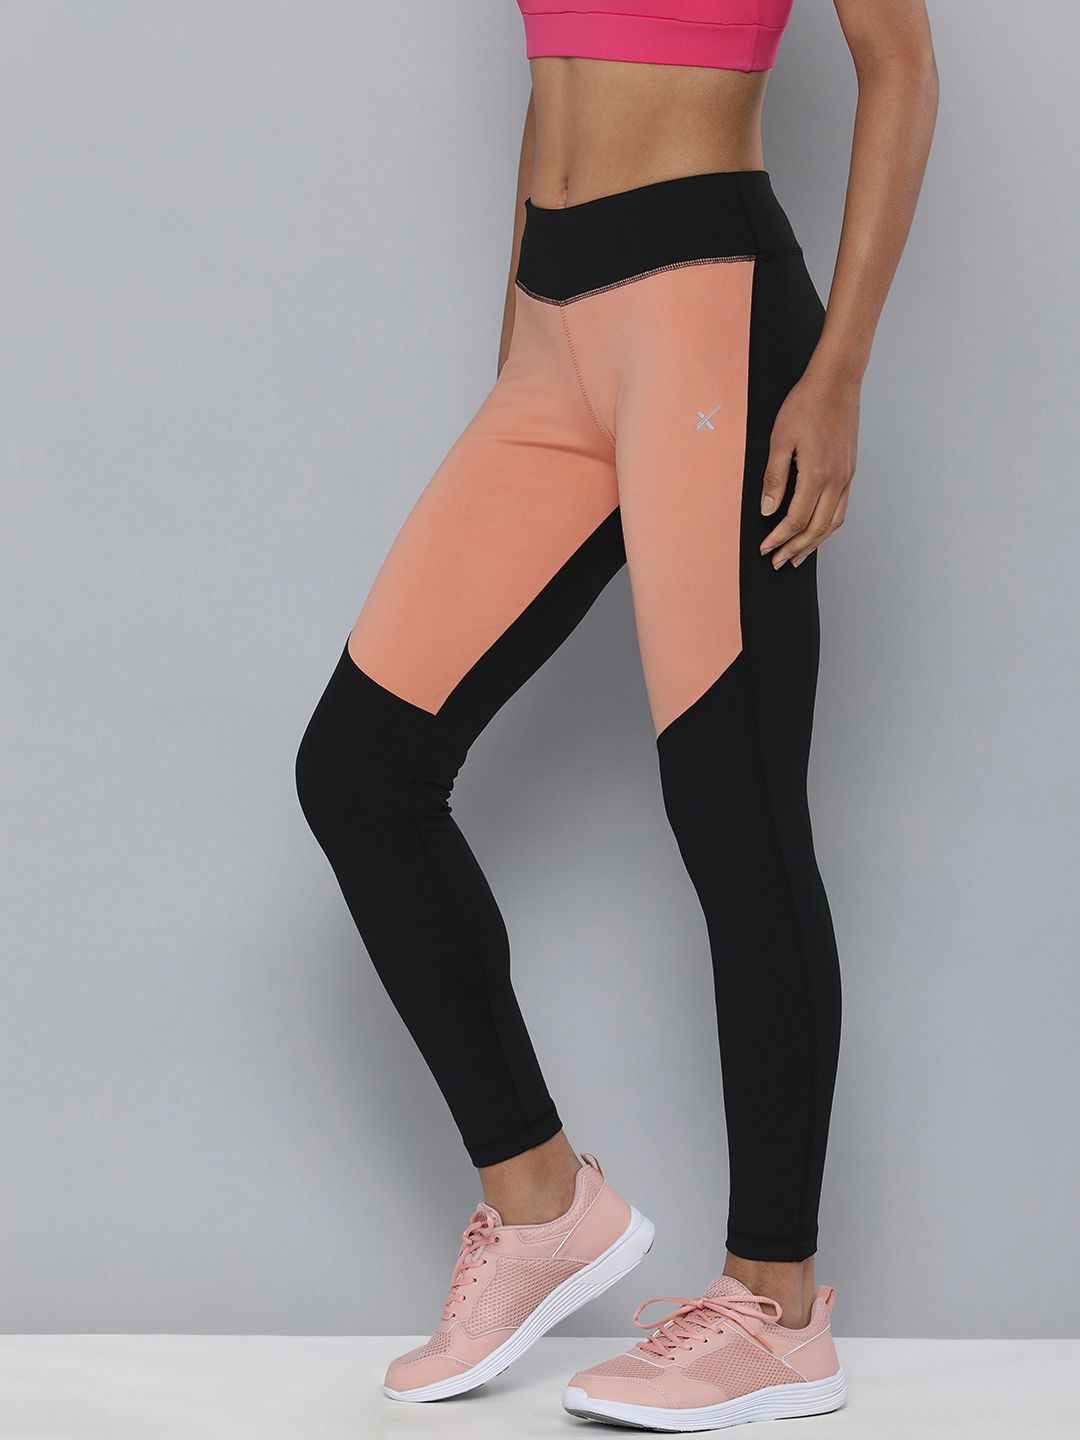 HRX by Hrithik Roshan Women Black & Pink Colourblocked Training Tights Price in India